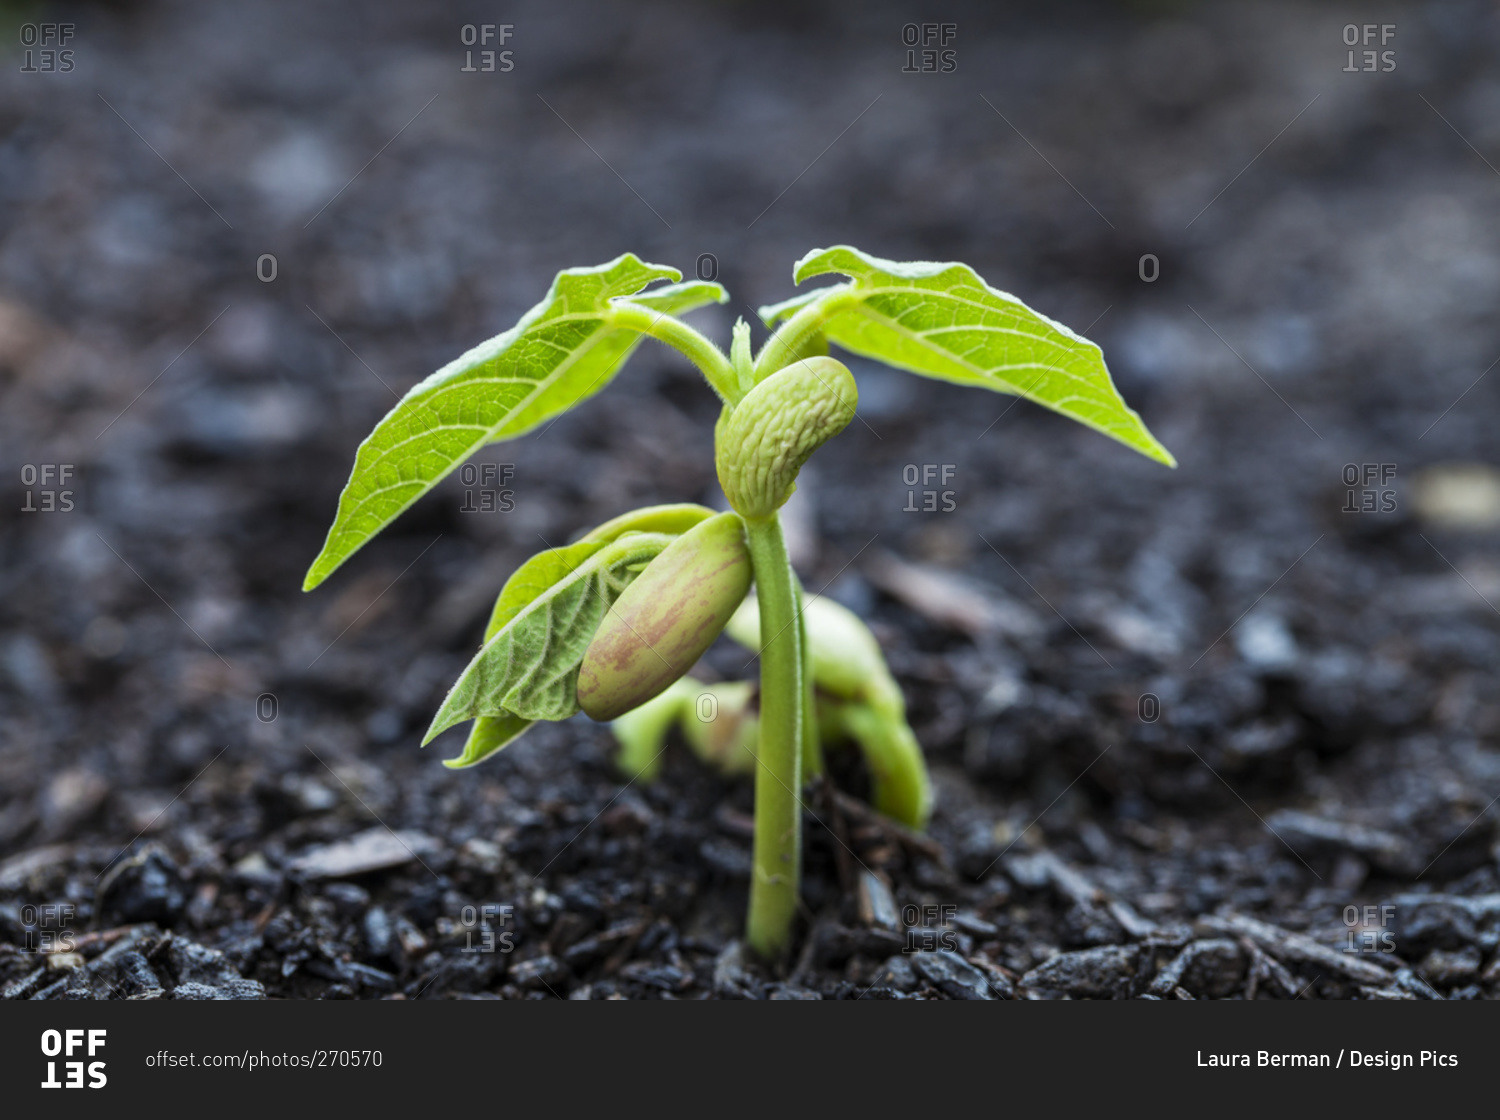 Close up of bean seedlings emerging from the soil and showing their first set of leaves, Toronto, Ontario, Canada